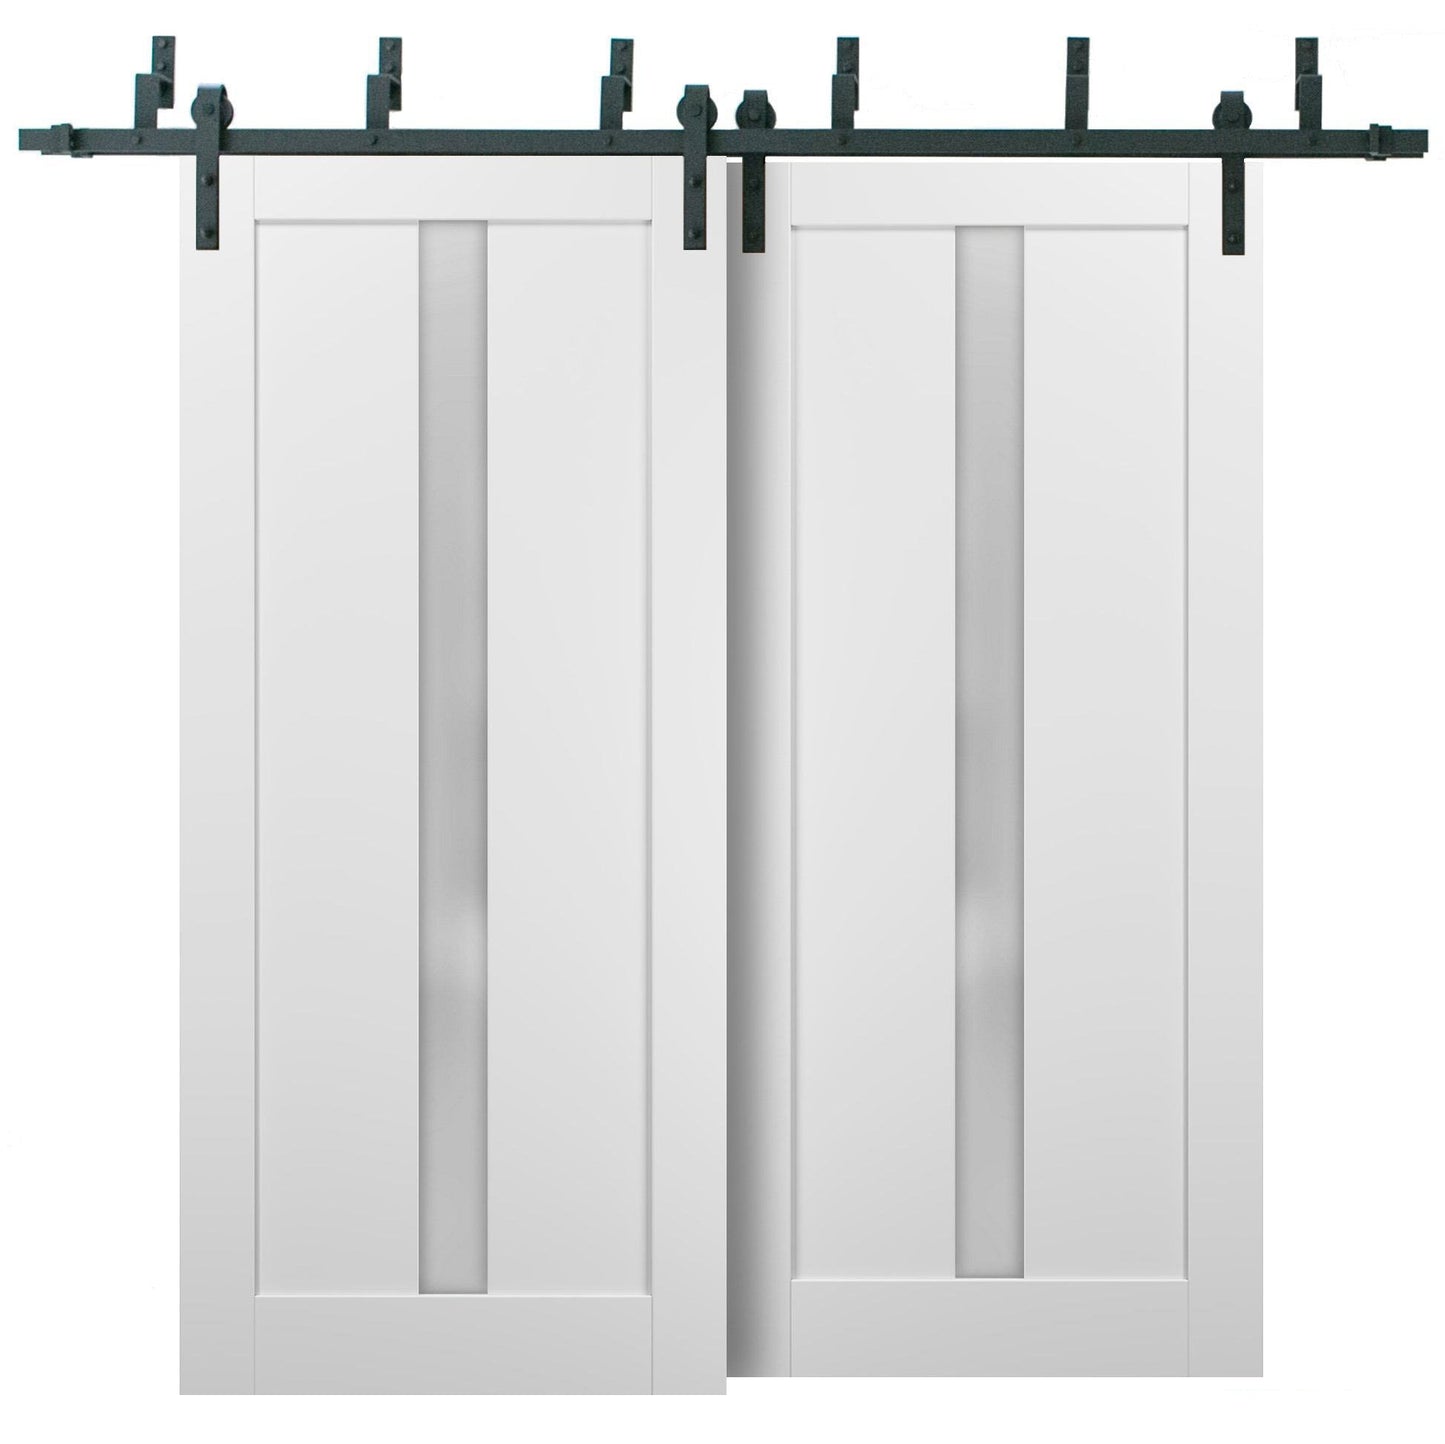 Quadro 4112 White Silk Double Barn Door with Frosted Glass | Black Bypass Rails